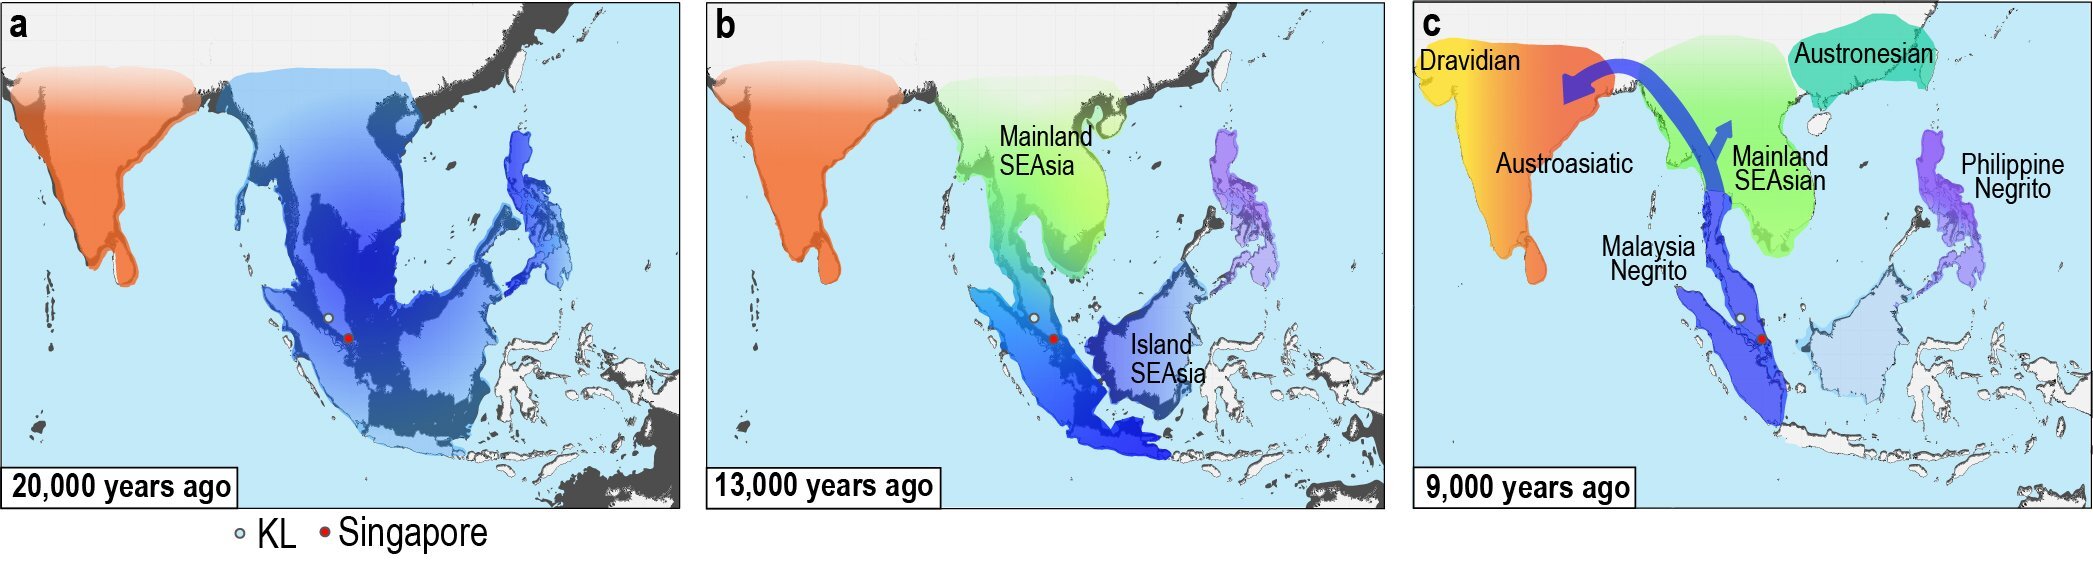 Prehistoric human migration in Southeast Asia driven by sea-level rise, study reveals